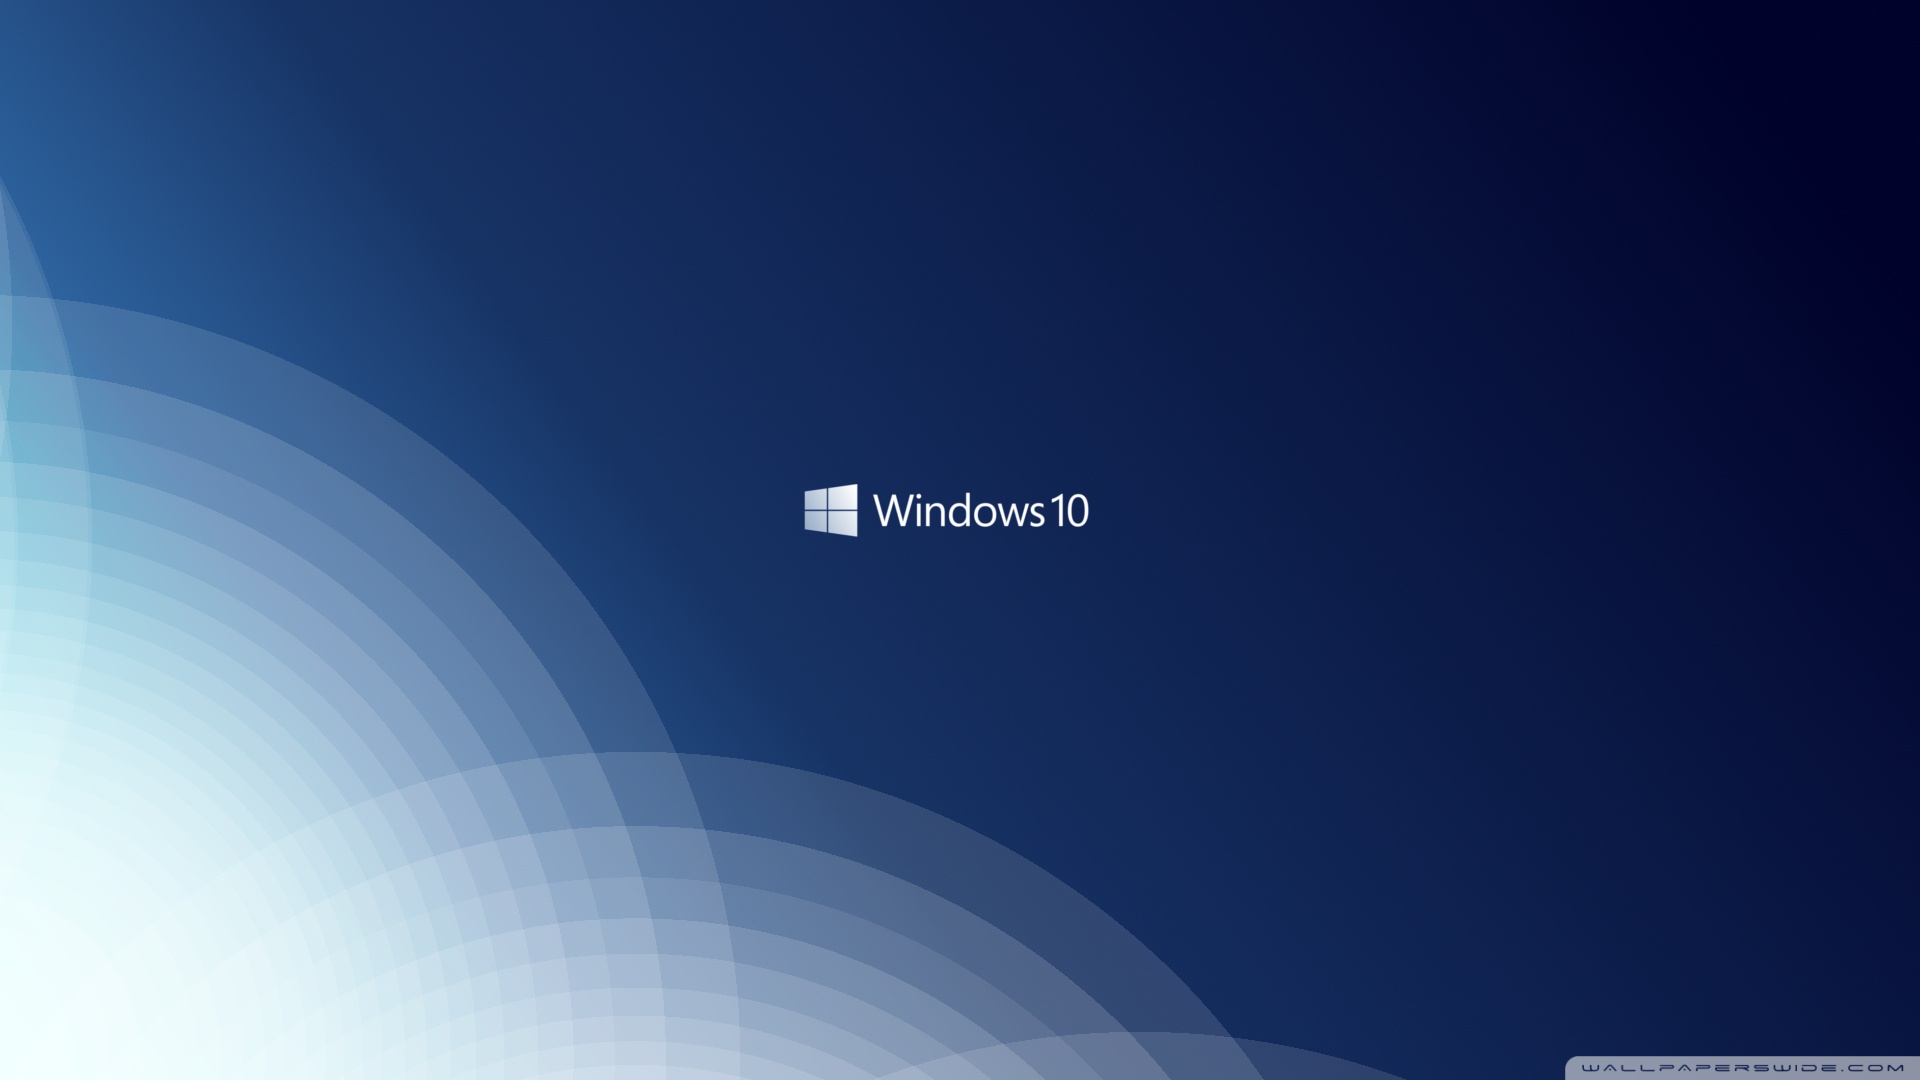 Free download Windows 10 4K Wallpapers Ultra HD Top 15 3840x2160 for your  Desktop Mobile  Tablet  Explore 42 Windows 4K Desktop Wallpaper  4K  Wallpaper Windows 10 4K Windows 10 Wallpapers 4K Windows 10 Wallpaper